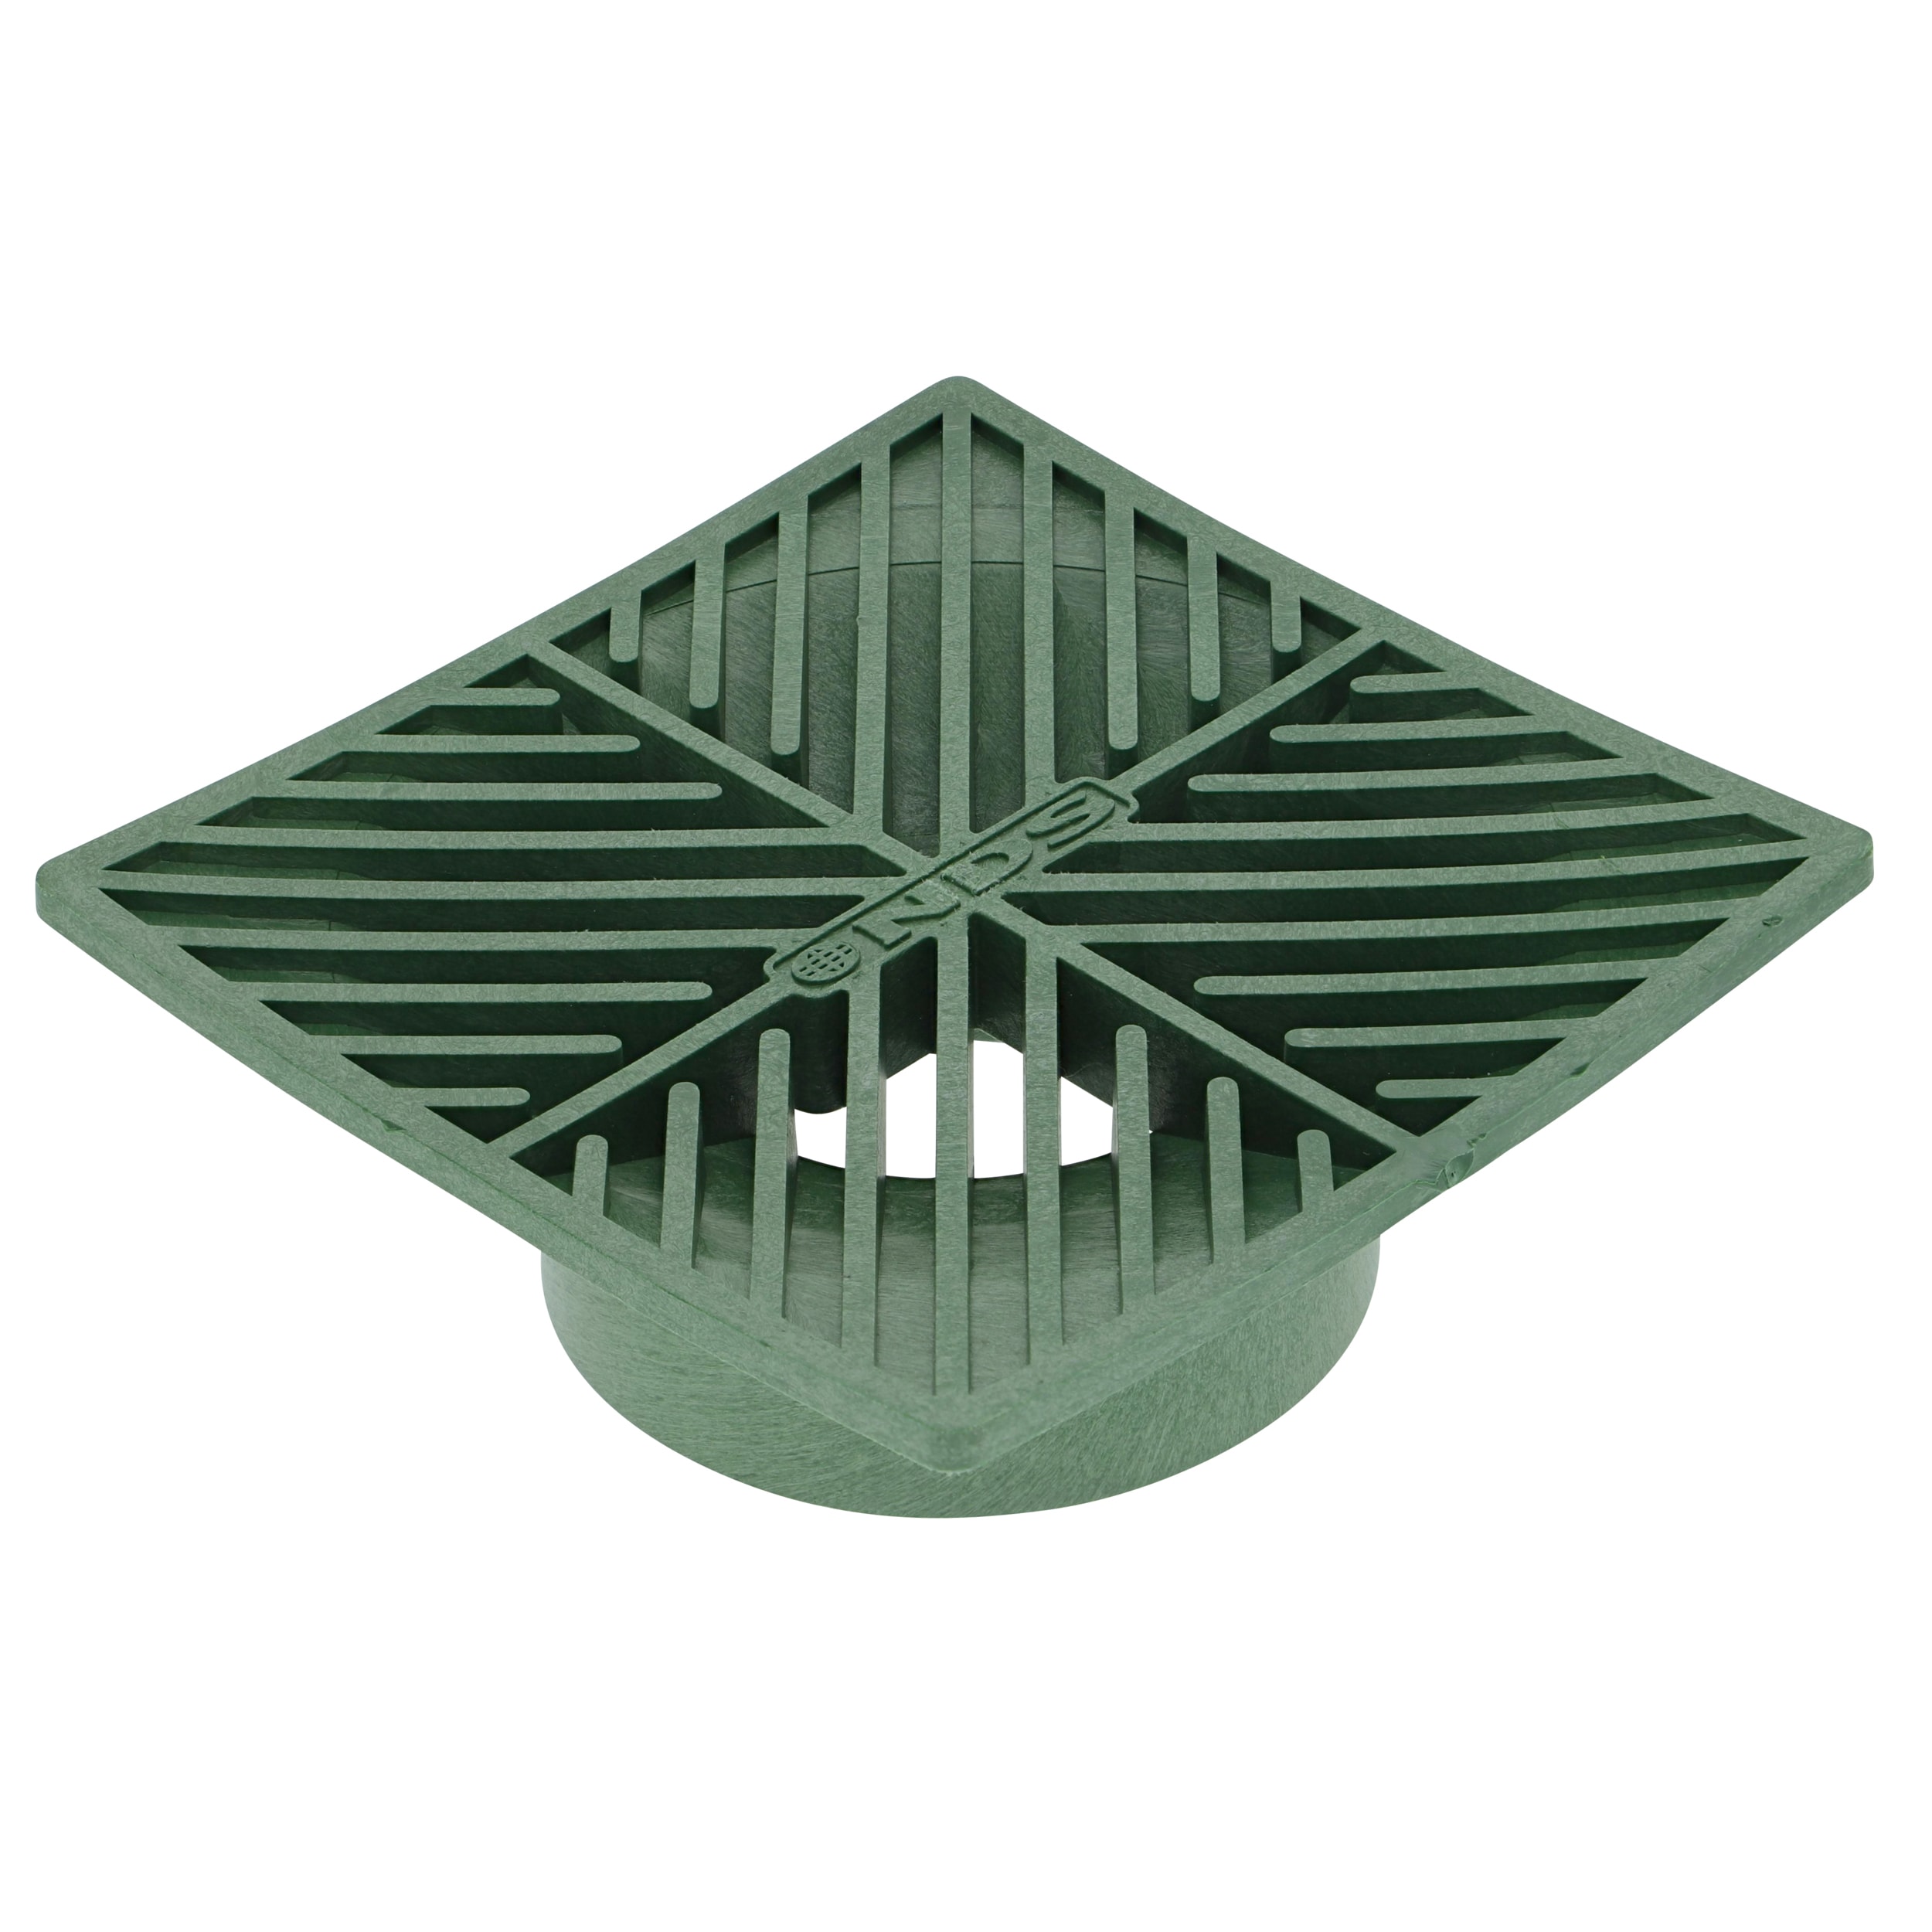 Drain Covers - Customizable Drainage Grating - Urban Accessories